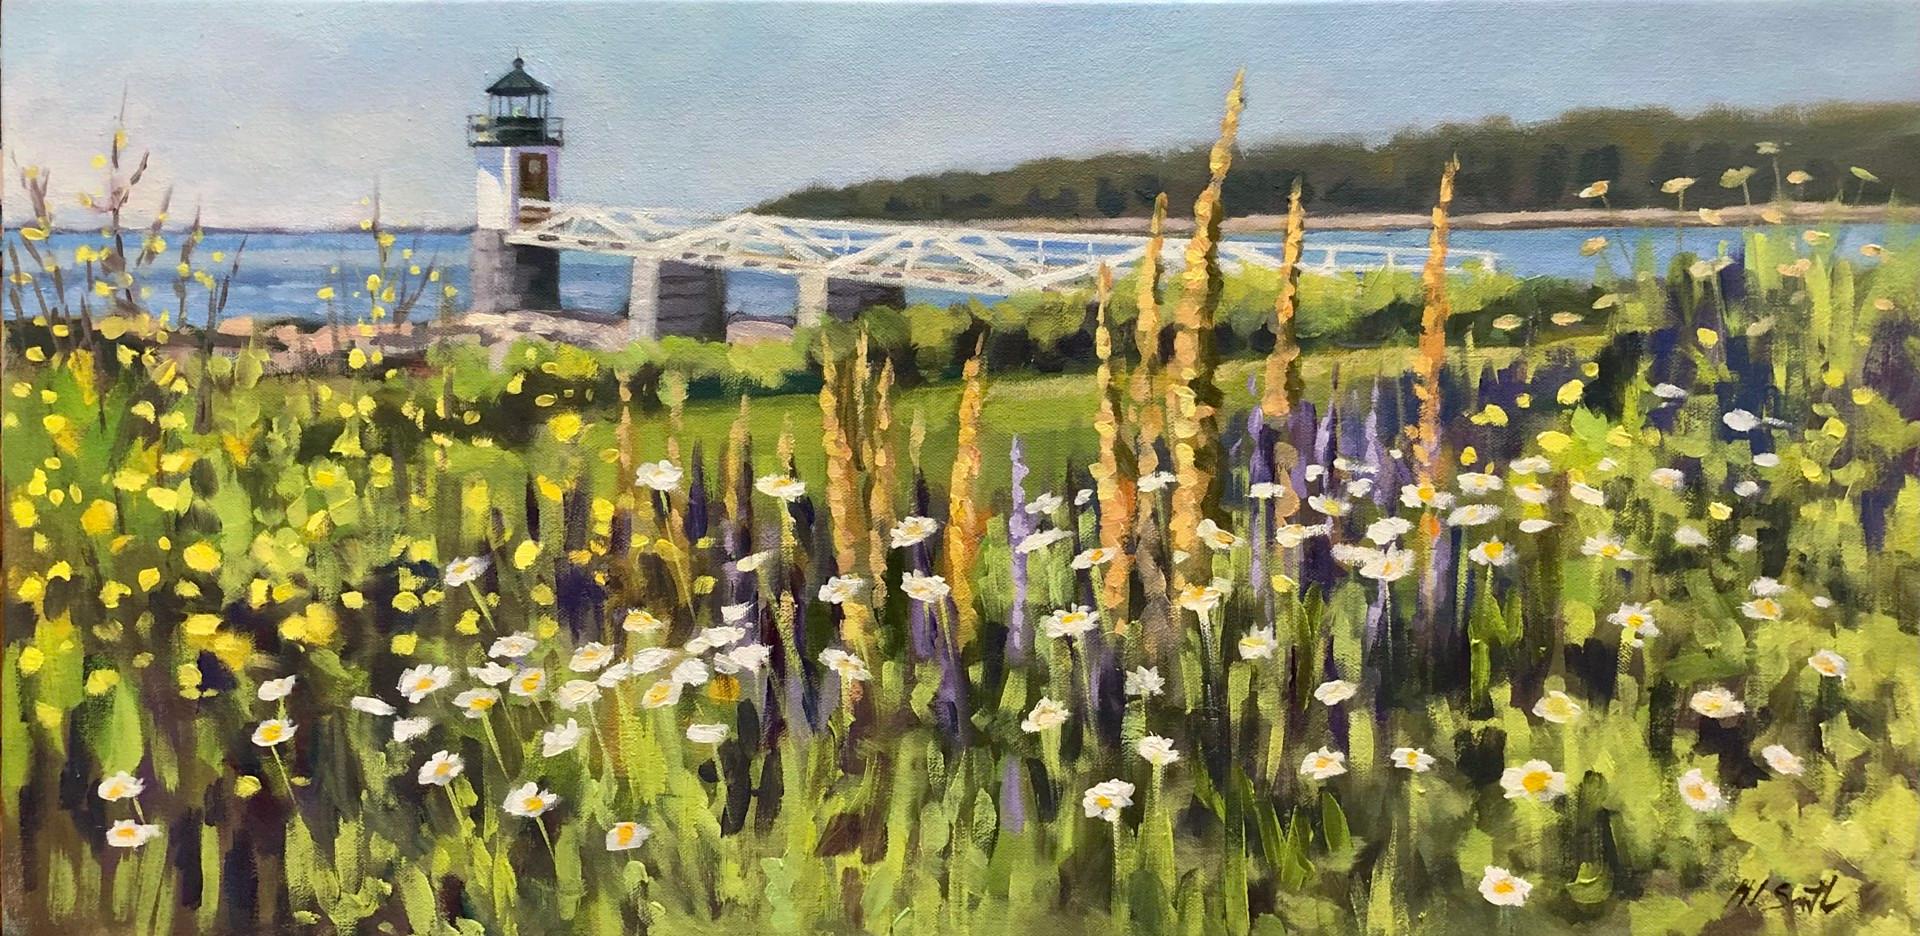 Field of Wild Flowers at Marshall Point - Art by Holly L. Smith